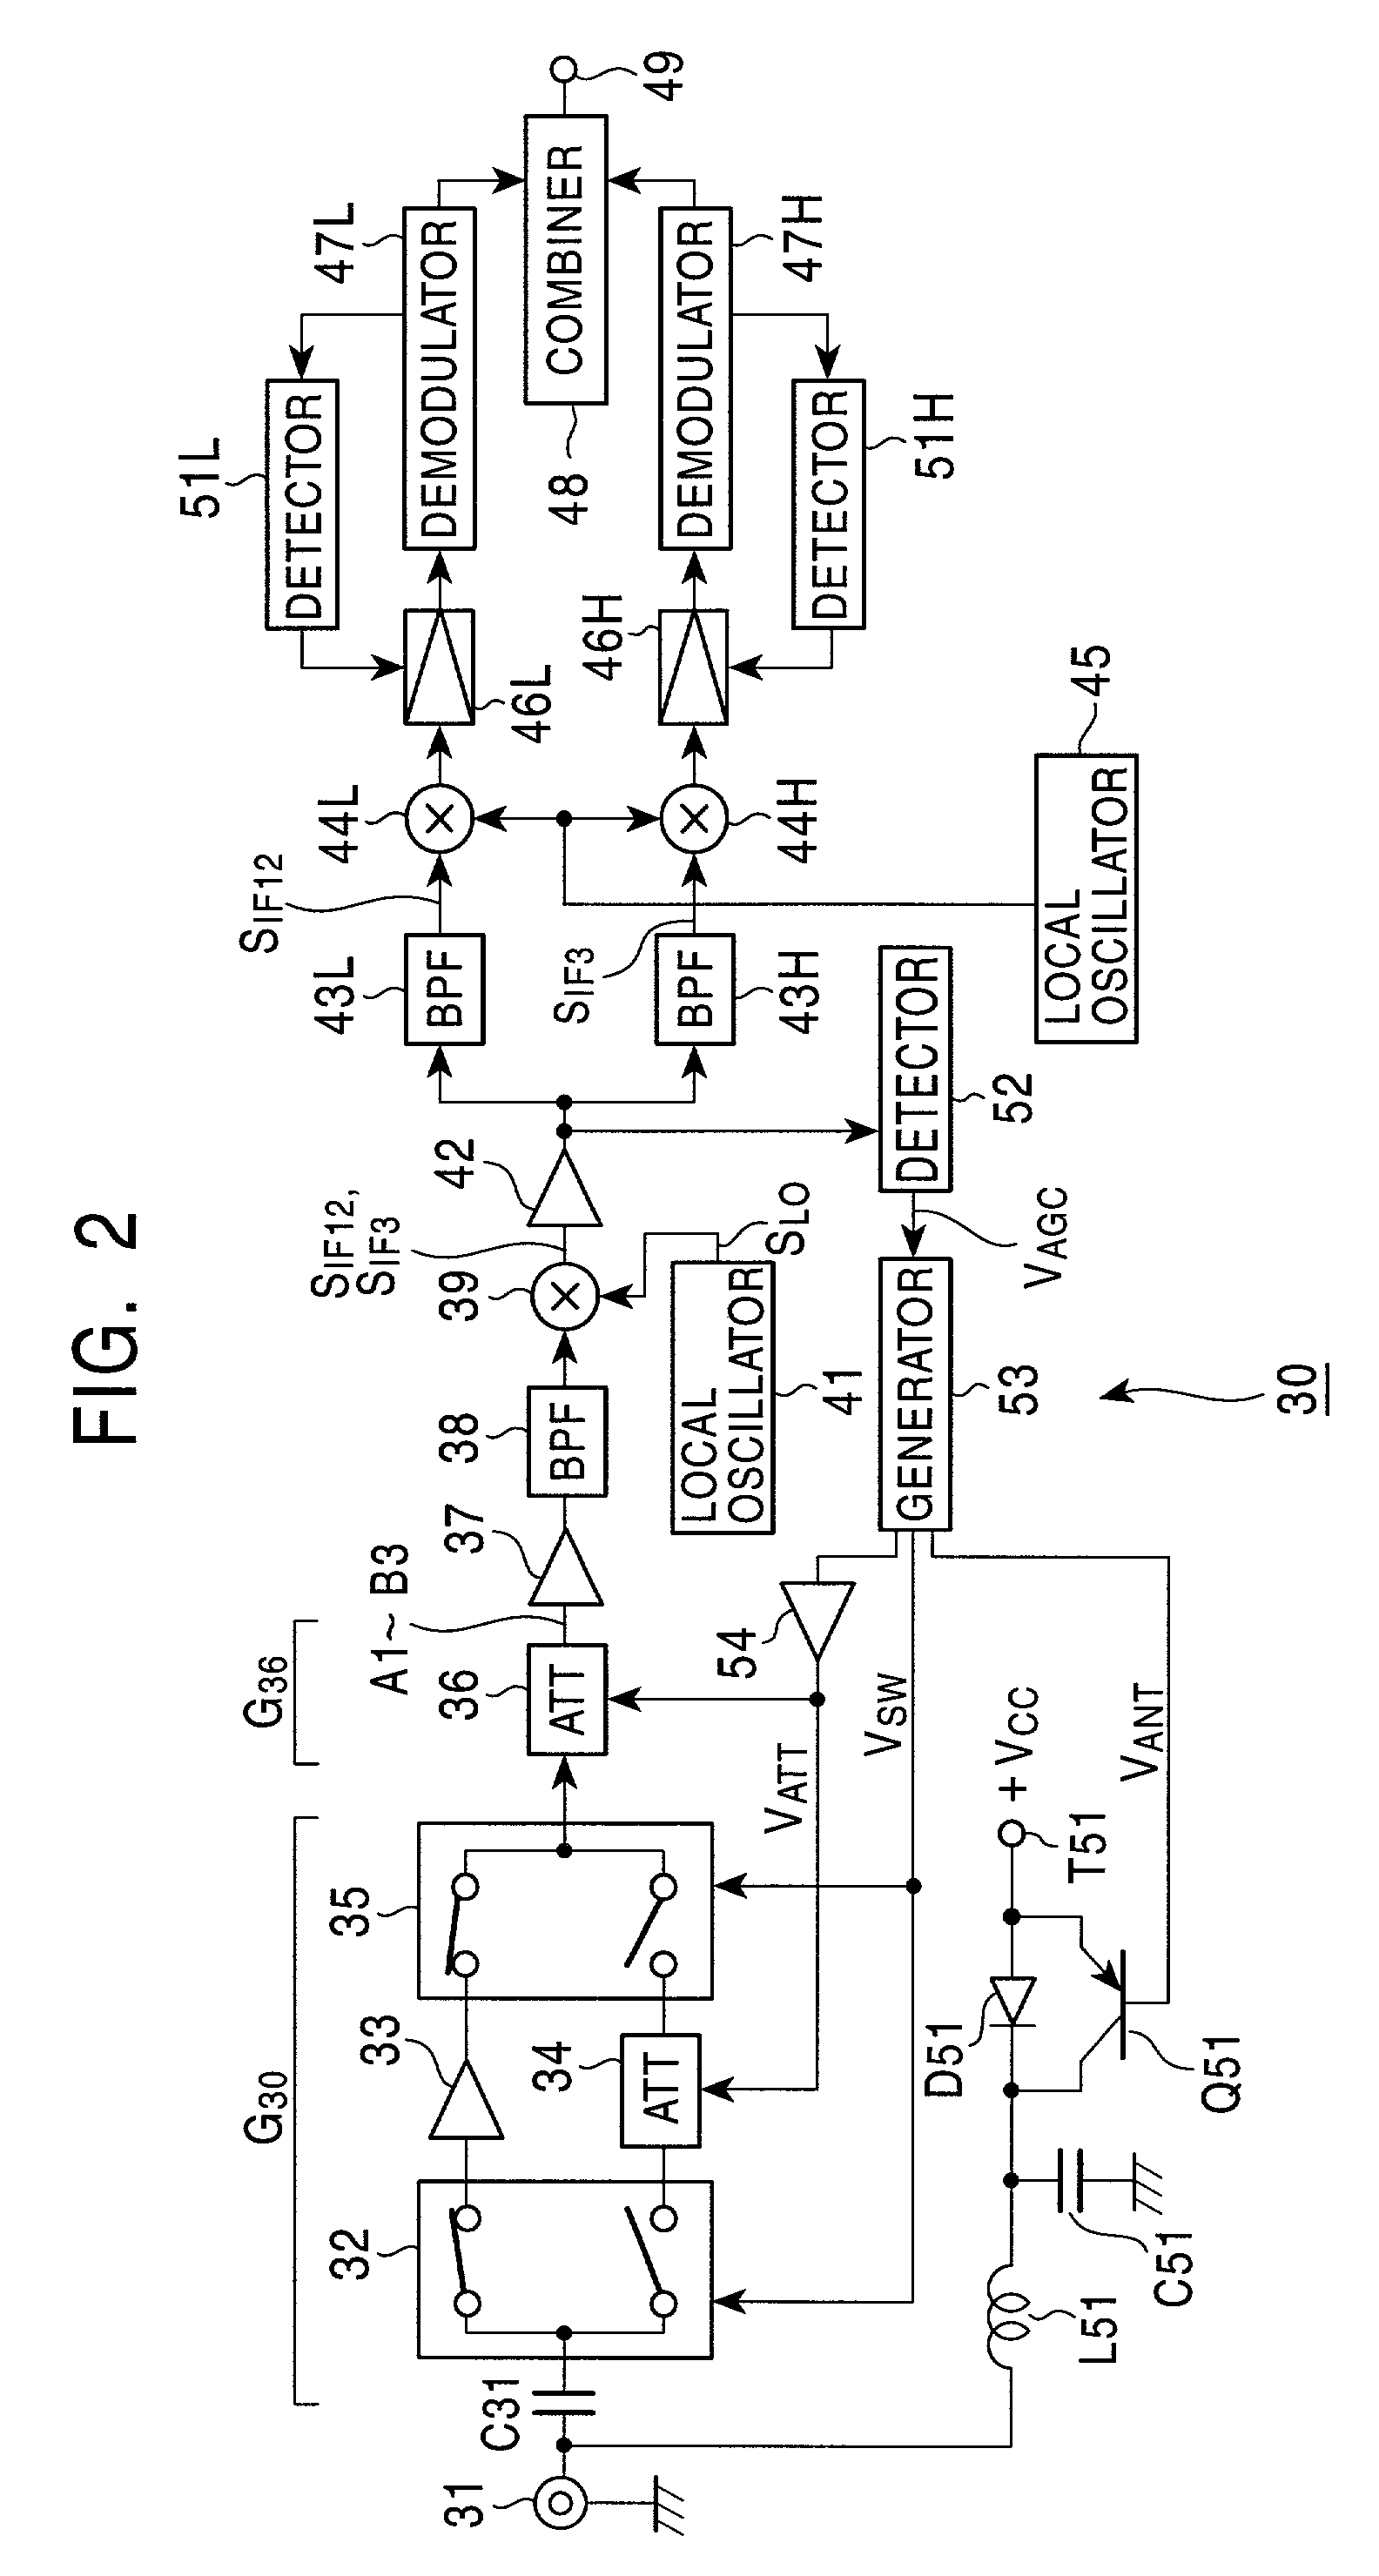 Antenna unit and receiving circuit